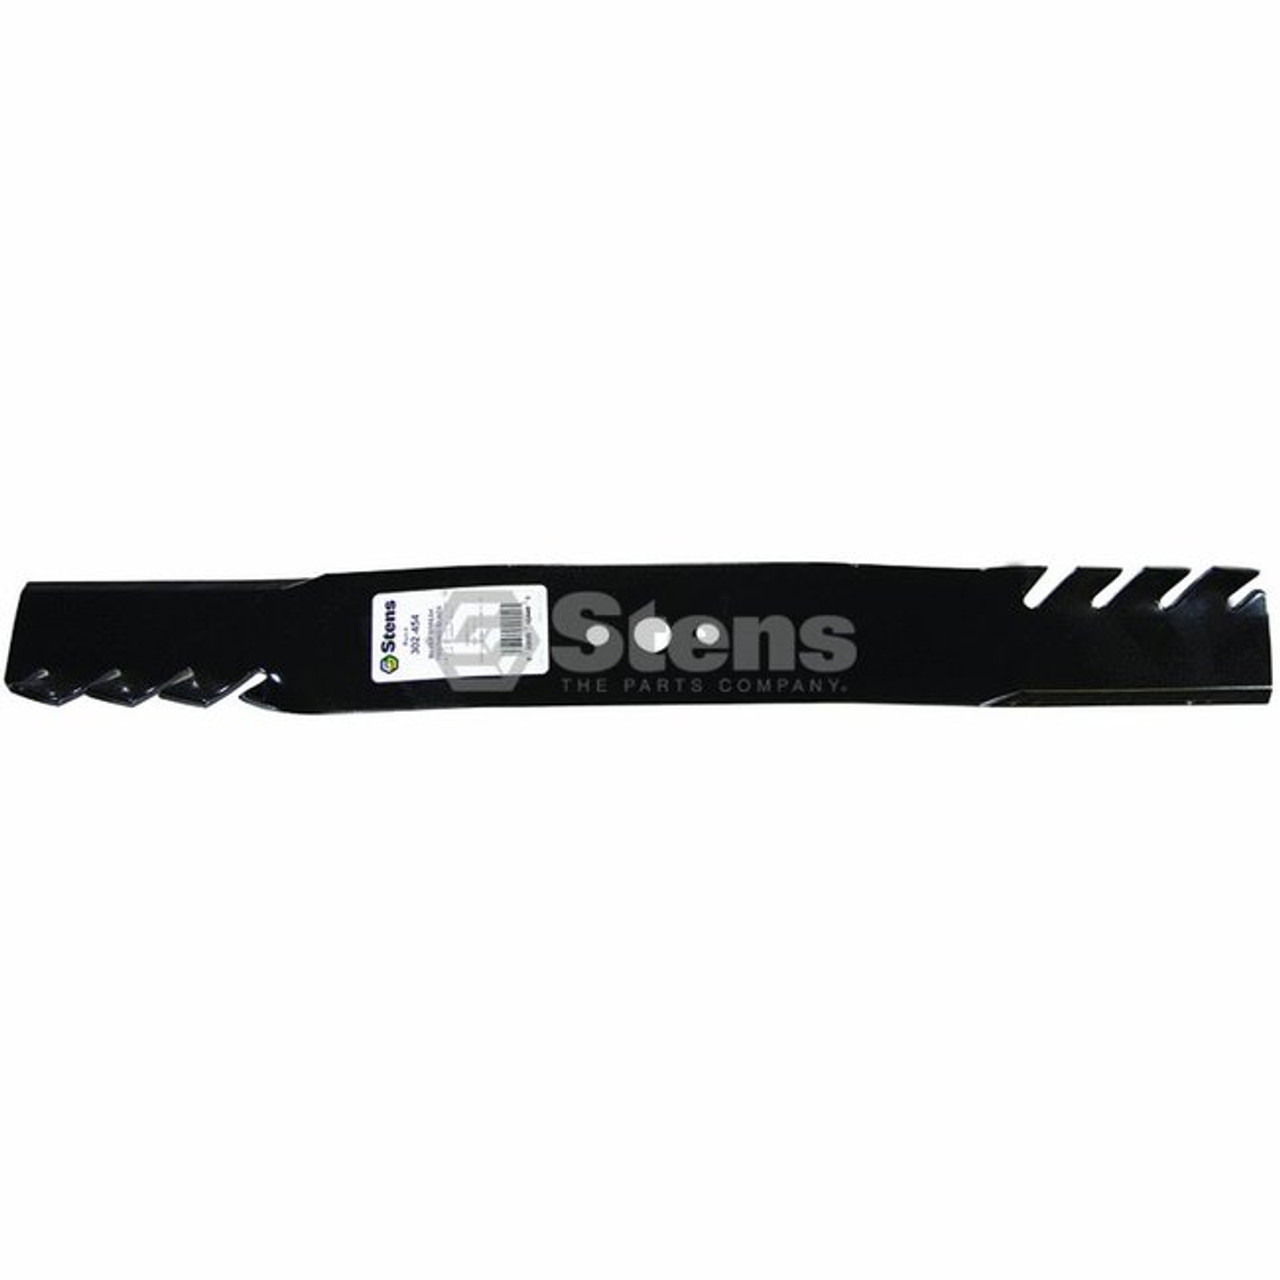 Toothed Mulching Blade for Poulan 22" Cut PP23009 Mulcher